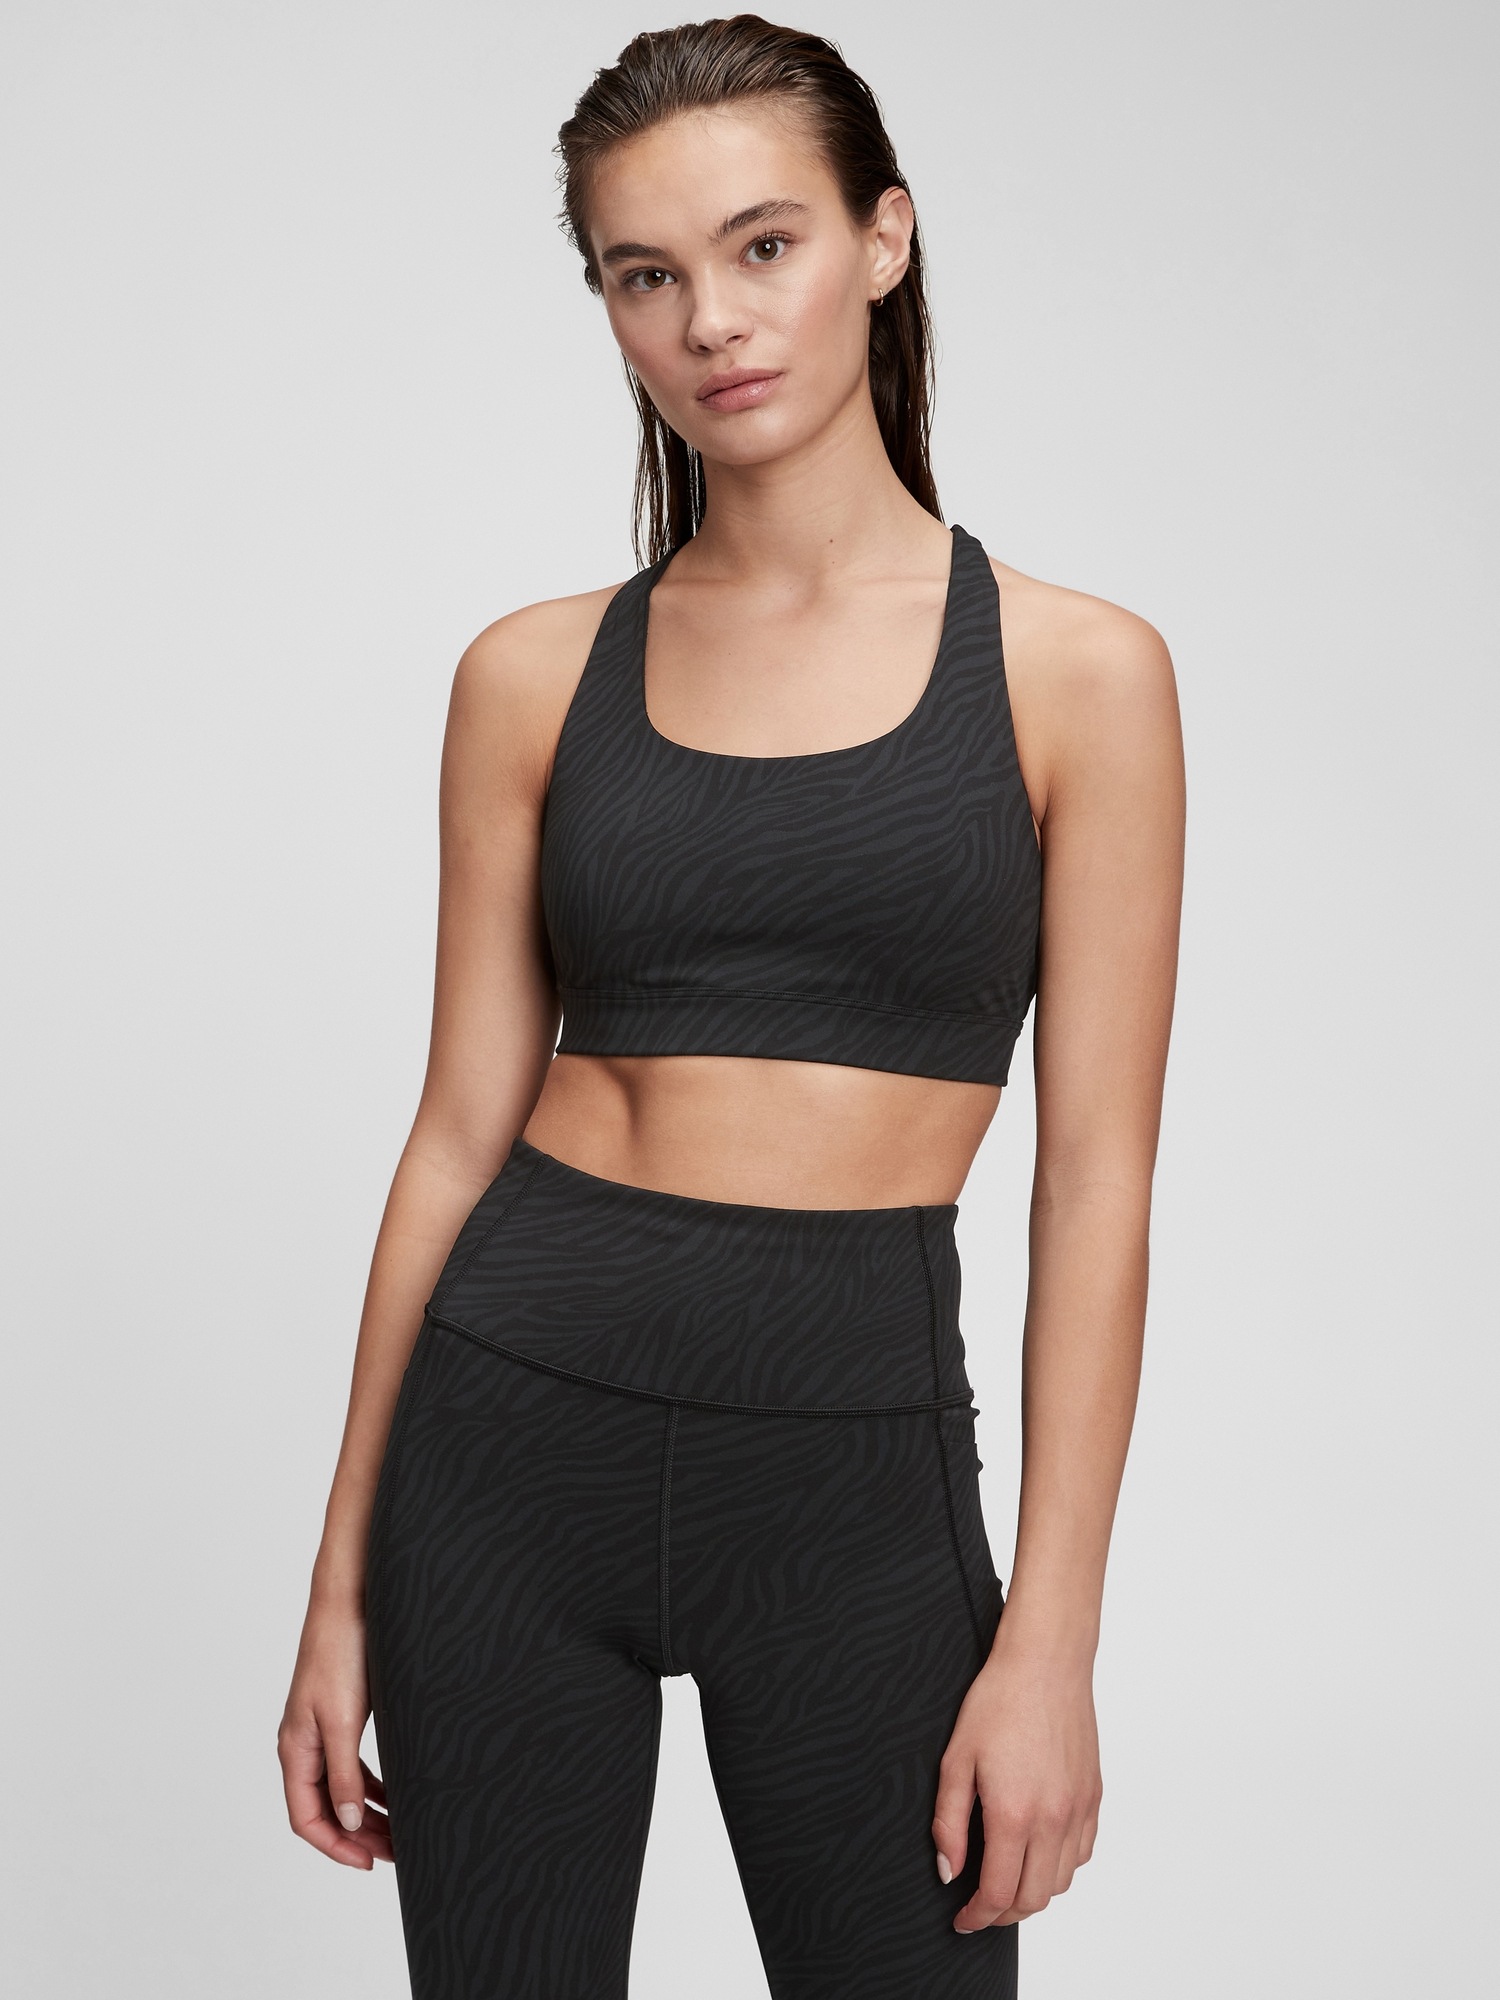 Gap GapFit Medium Impact Crossback Sports Bra, We Compared 10 Gap Sports  Bras With Varying Levels of Support (and They're on Sale)